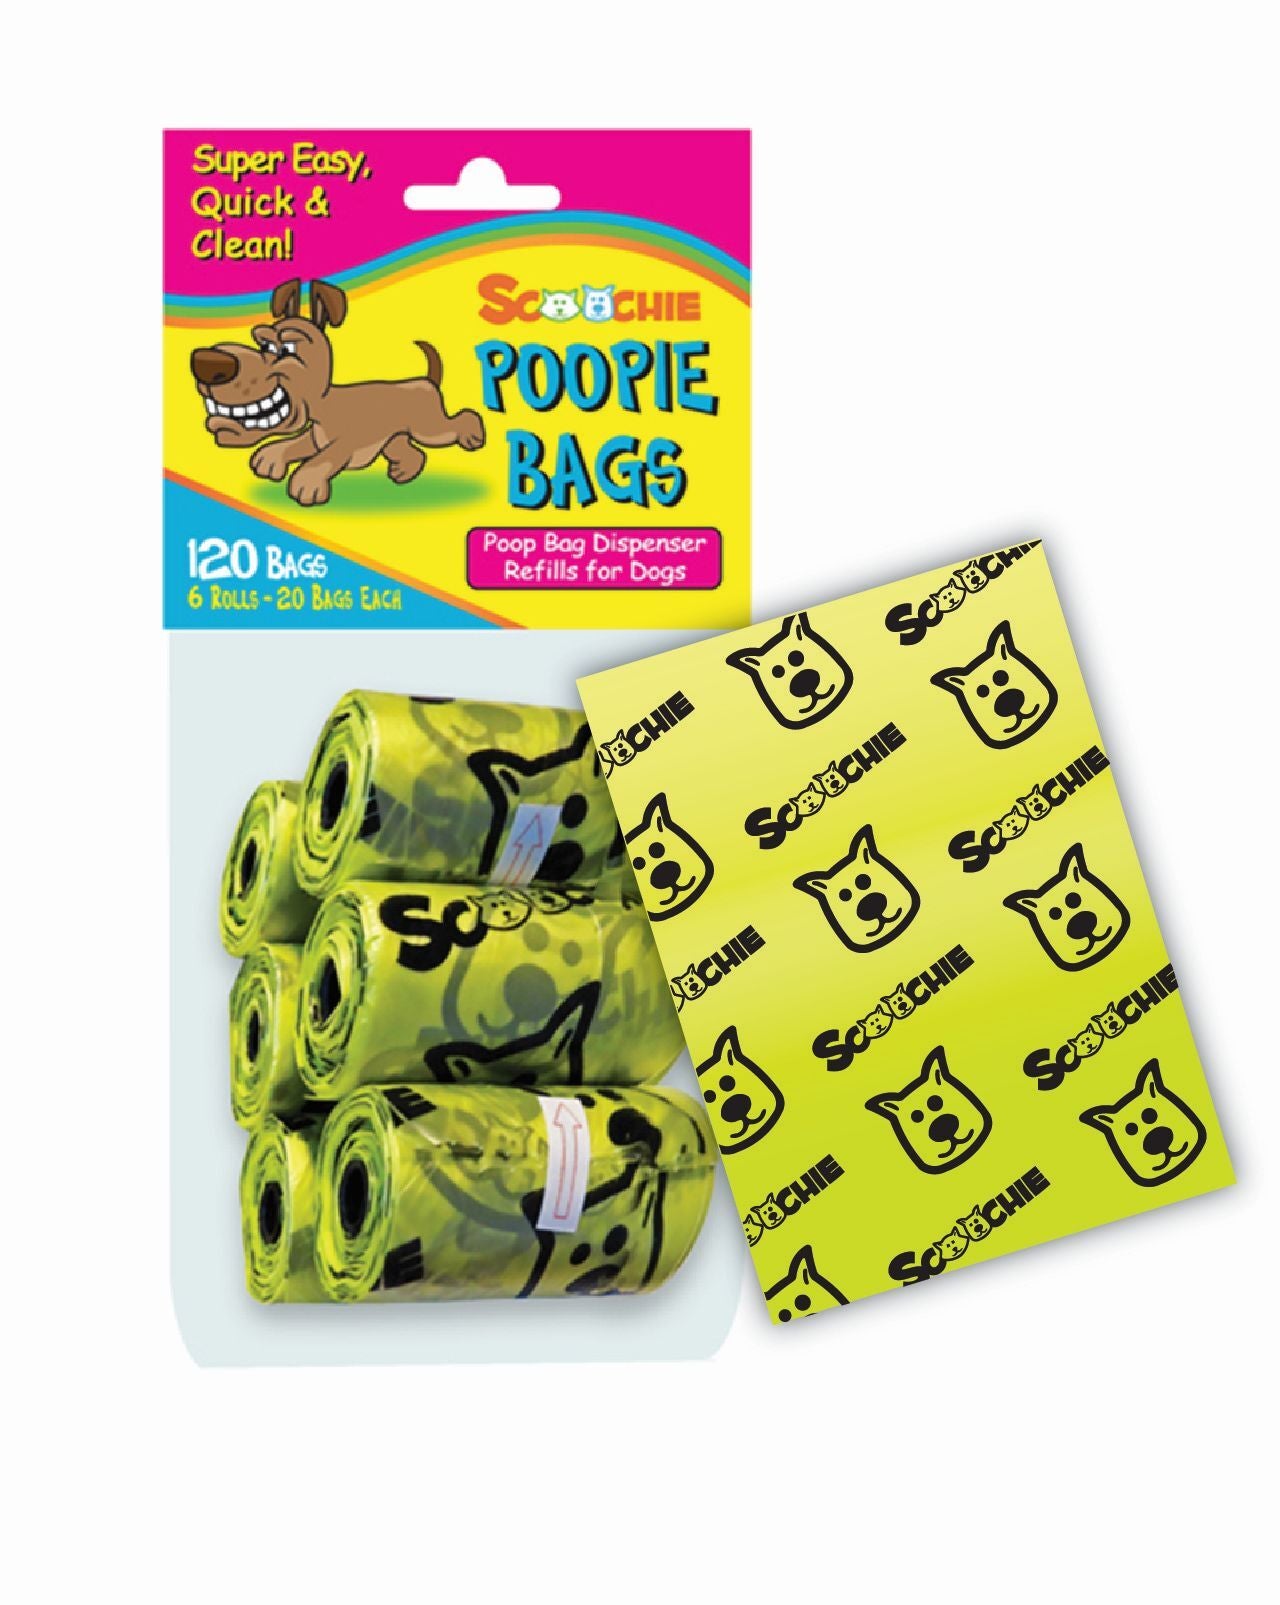 Scoochie Poopie Bags For Dogs Size 6 Rolls